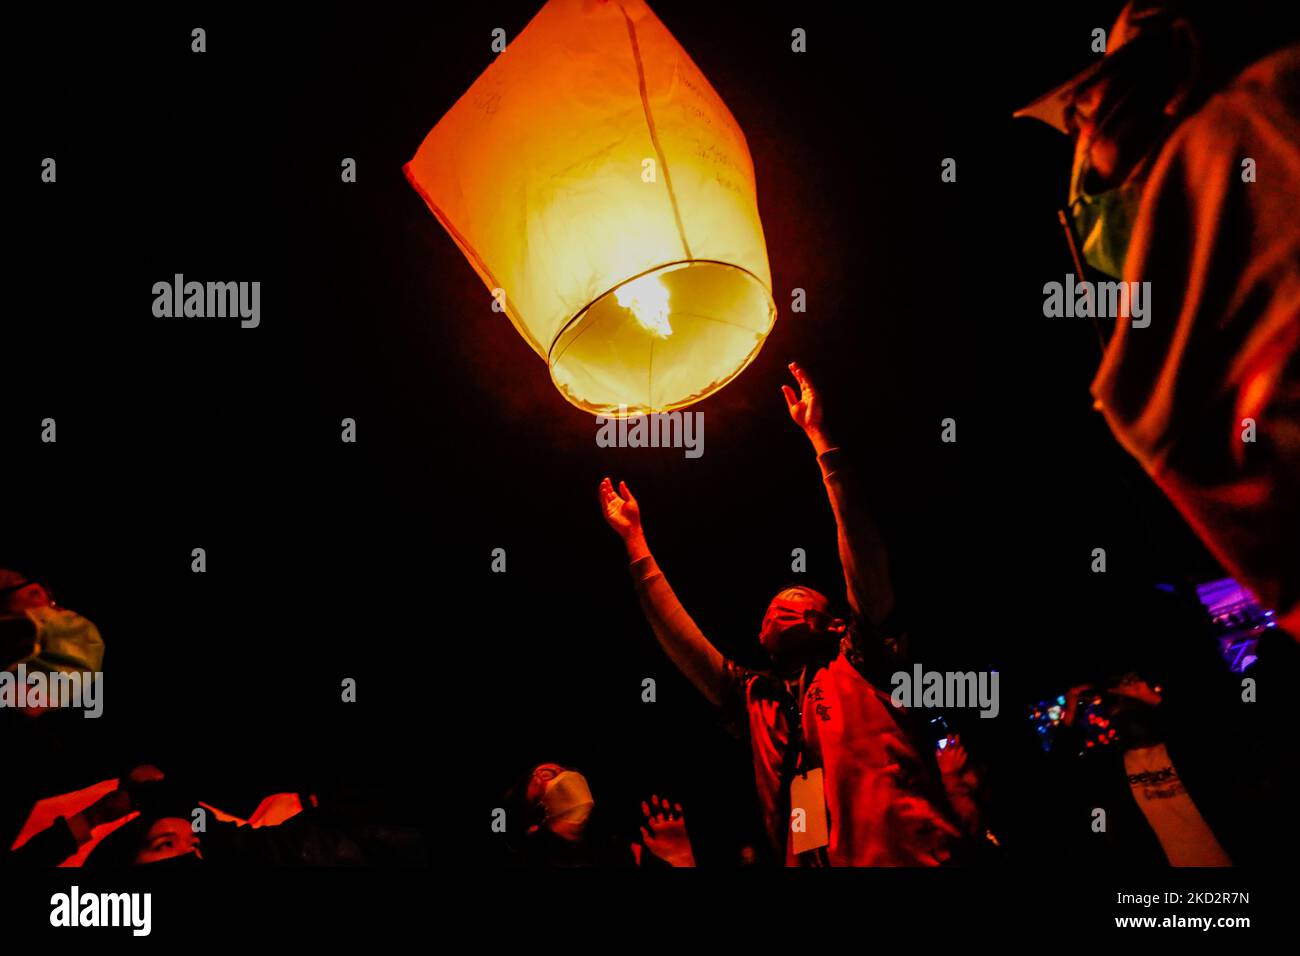 People take pictures as lanterns are lit to colour the sky with people’s wishes for luck, blessings, healthy and prosperity, during the annual Pingxi Sky Lantern Festival, in Pingxi Area of New Taipei, Taiwan, 15 February 2022. Lantern Festival has been a significant convention celebrated amongst Chinese speaking regions across Asia including Taiwan, Hong Kong and Mainland China, according to the lunar calendar, with Taiwanese people releasing paper lanterns brimming with wishes and desires including safety and stability. (Photo by Ceng Shou Yi/NurPhoto) Stock Photo